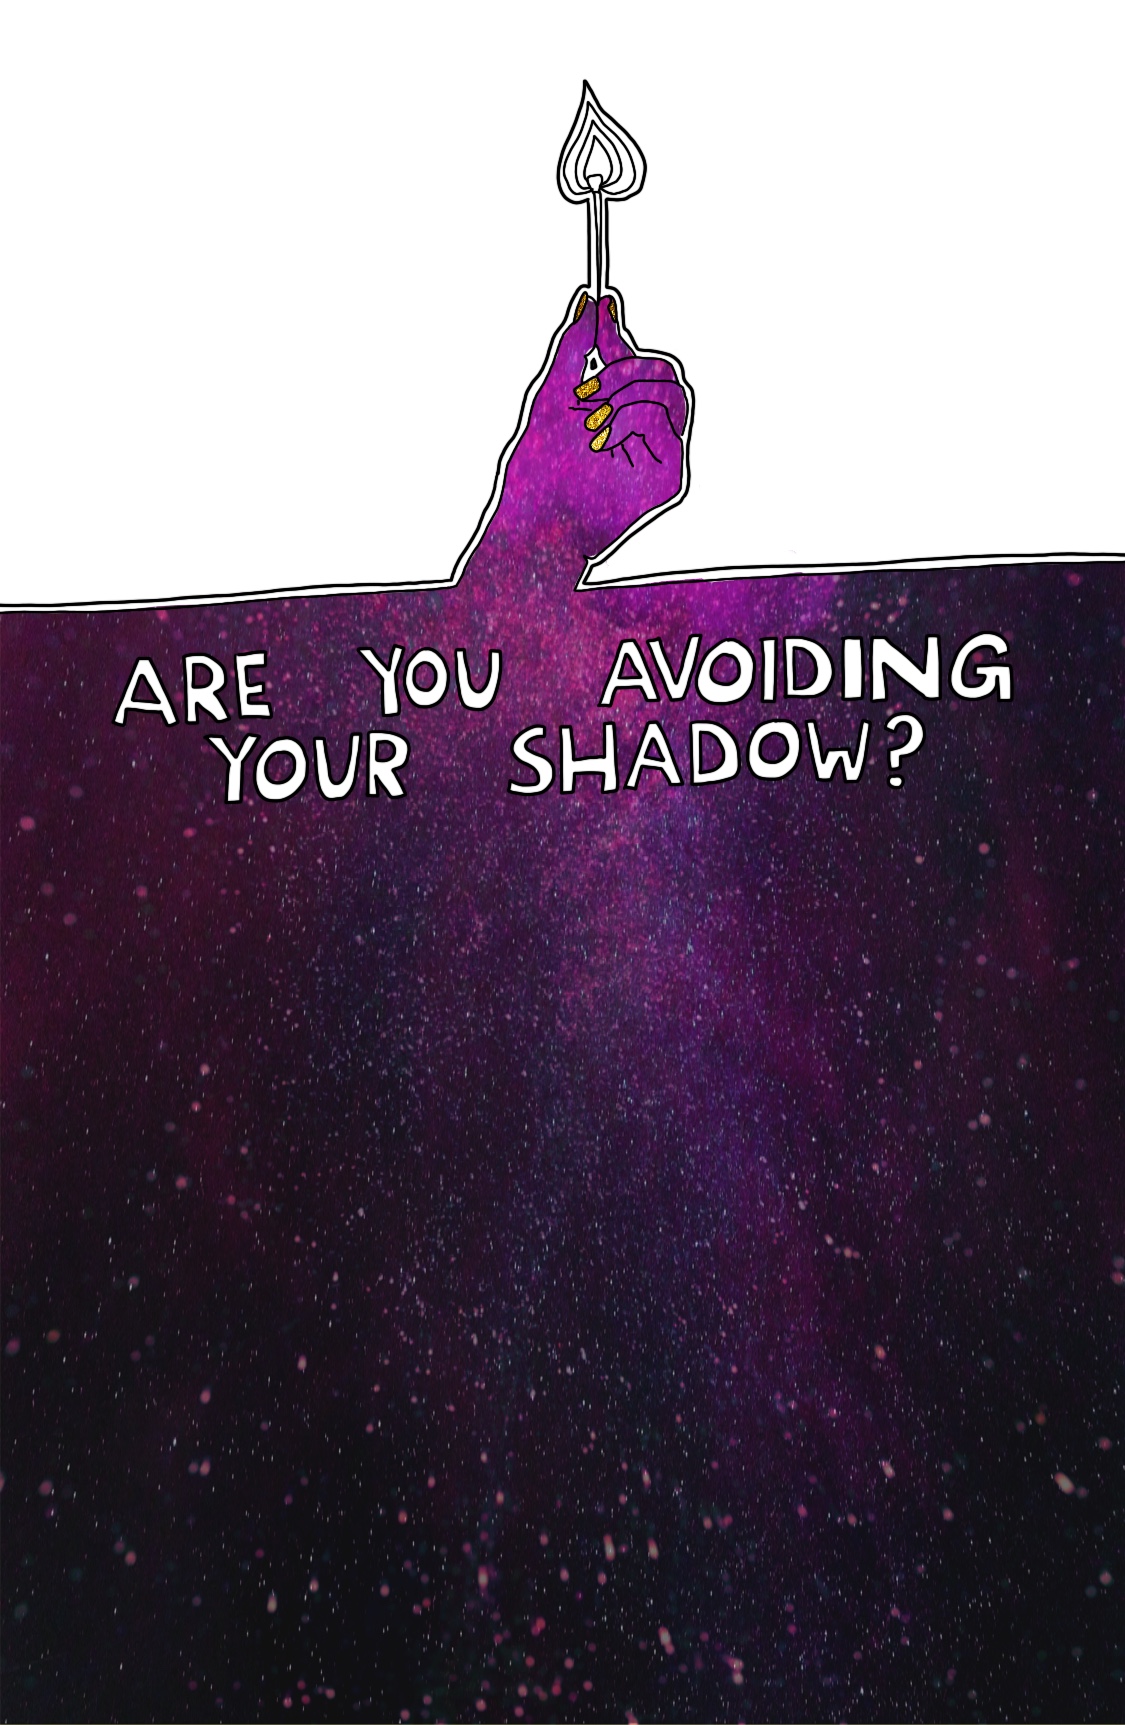 Journal Prompt: Are you avoiding your shadow?